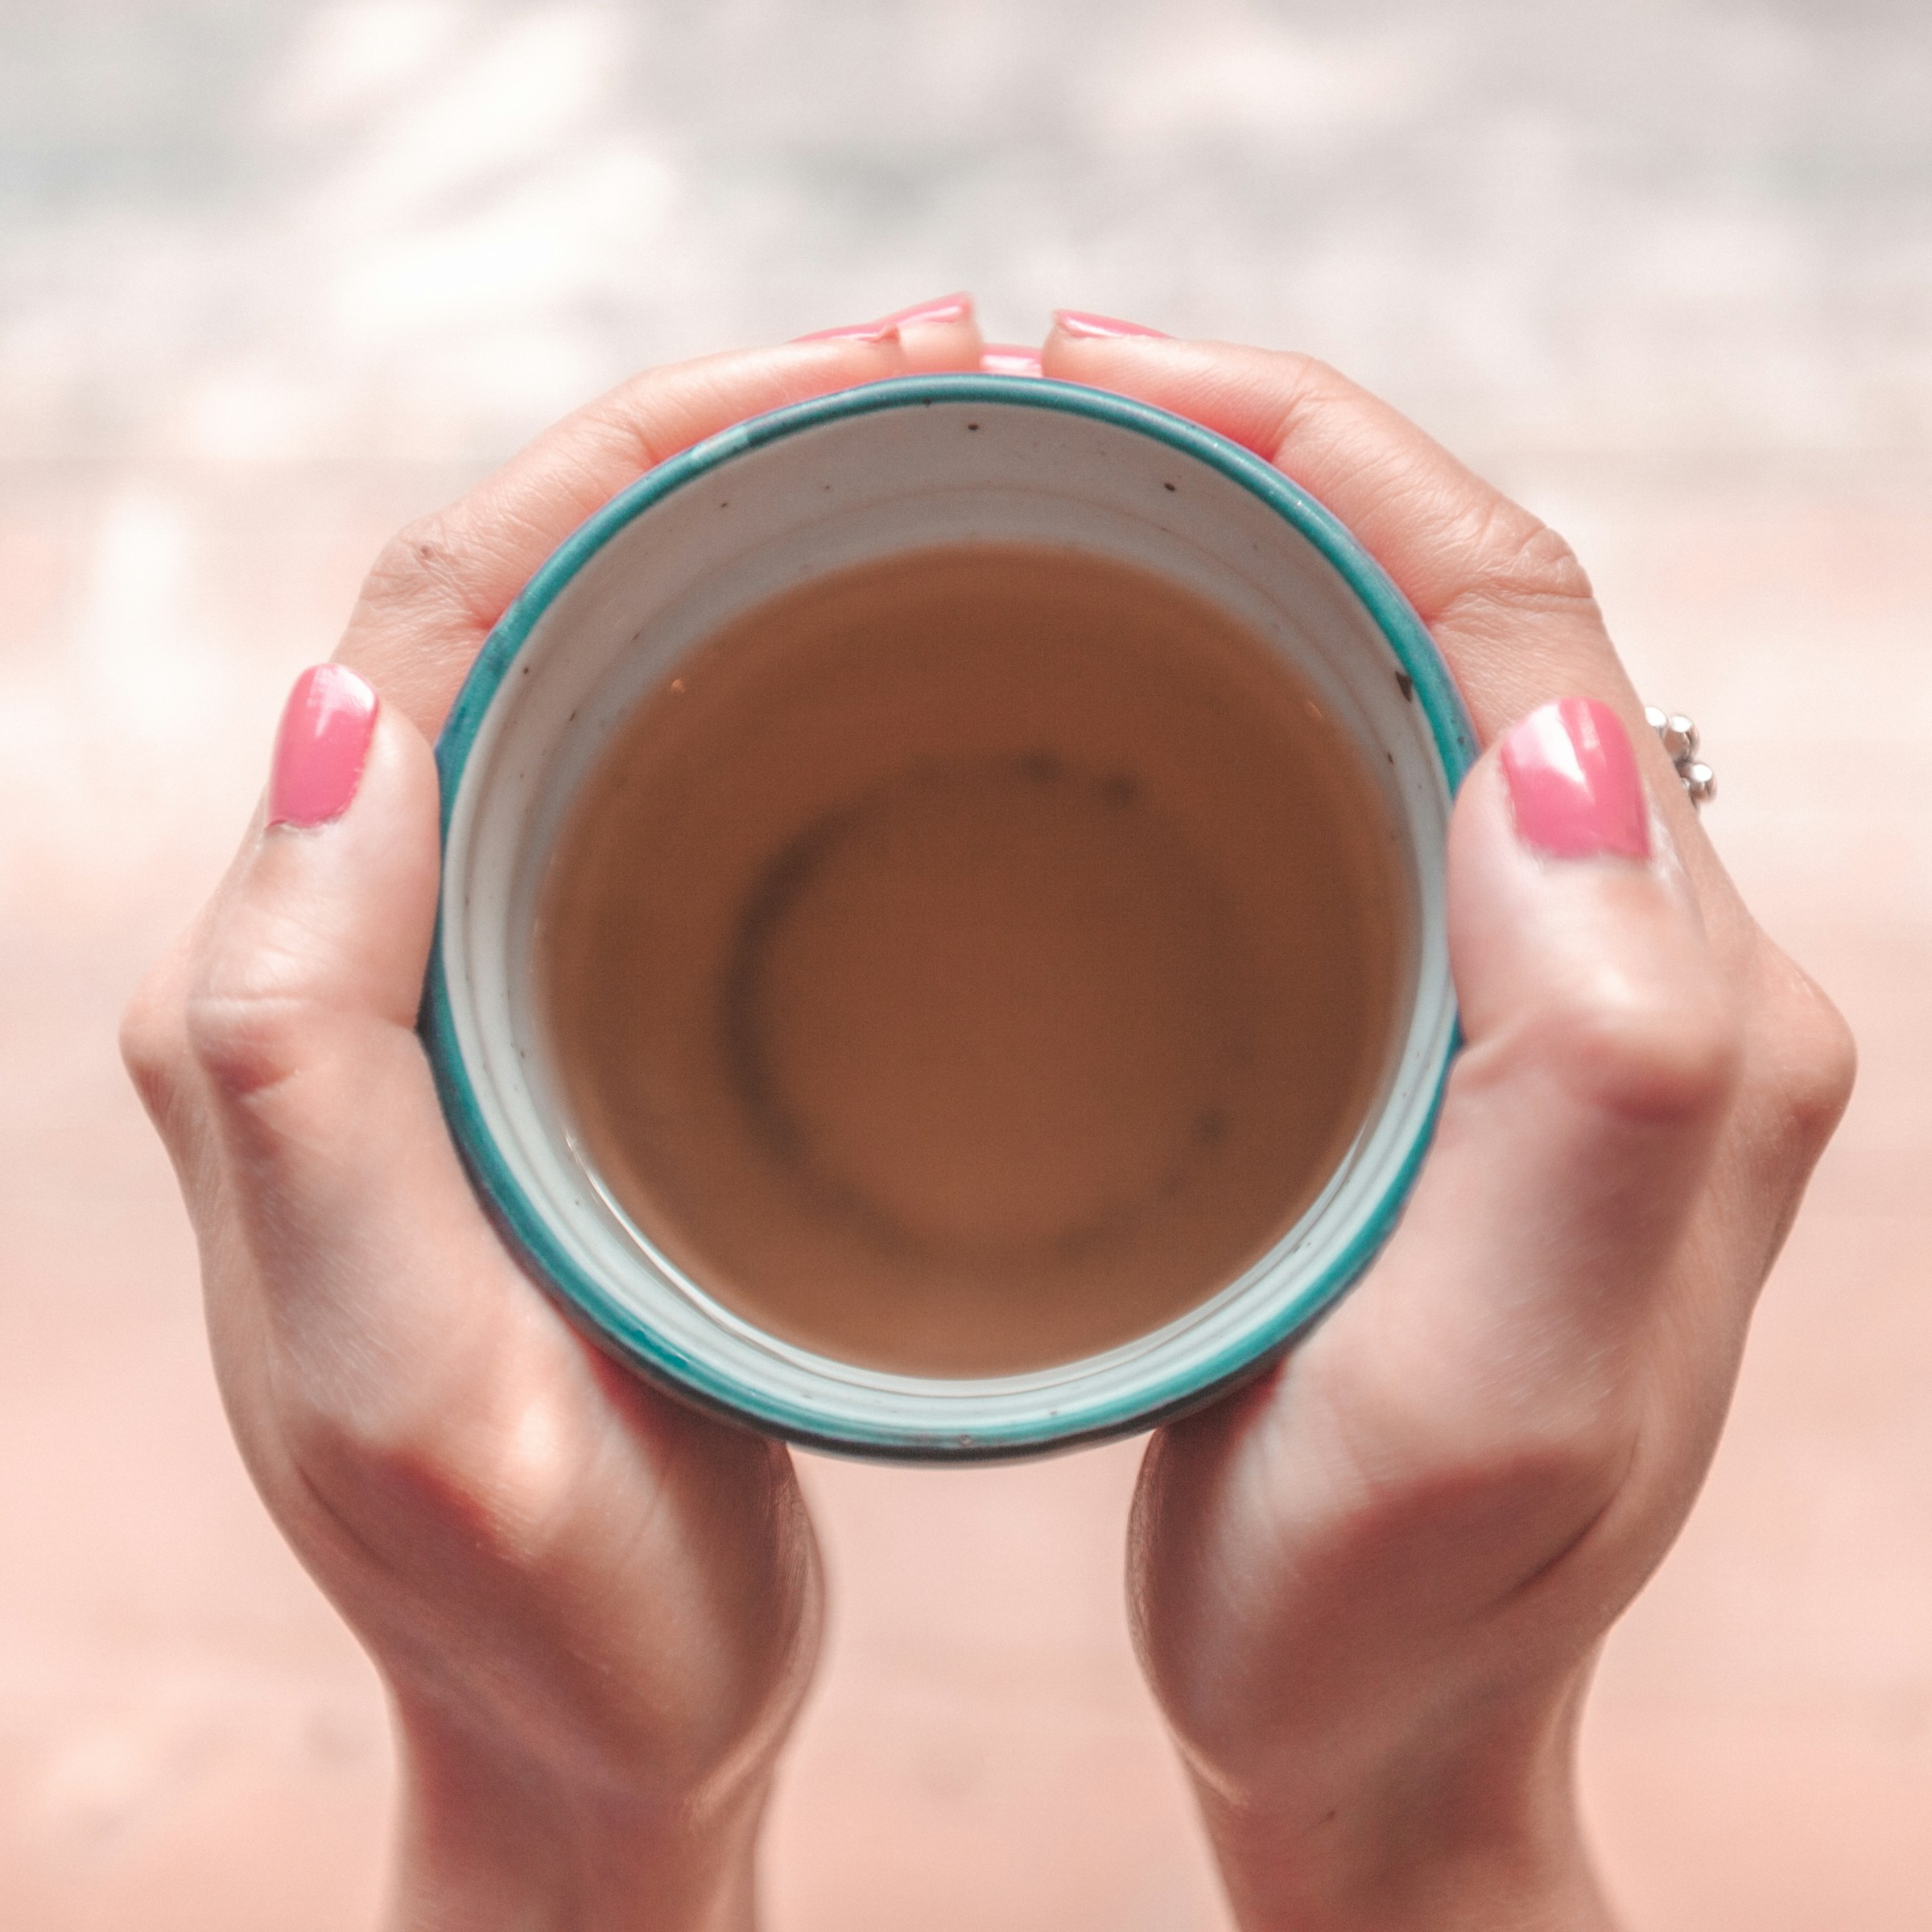 A person holding a cup of tea | Source: Unsplash